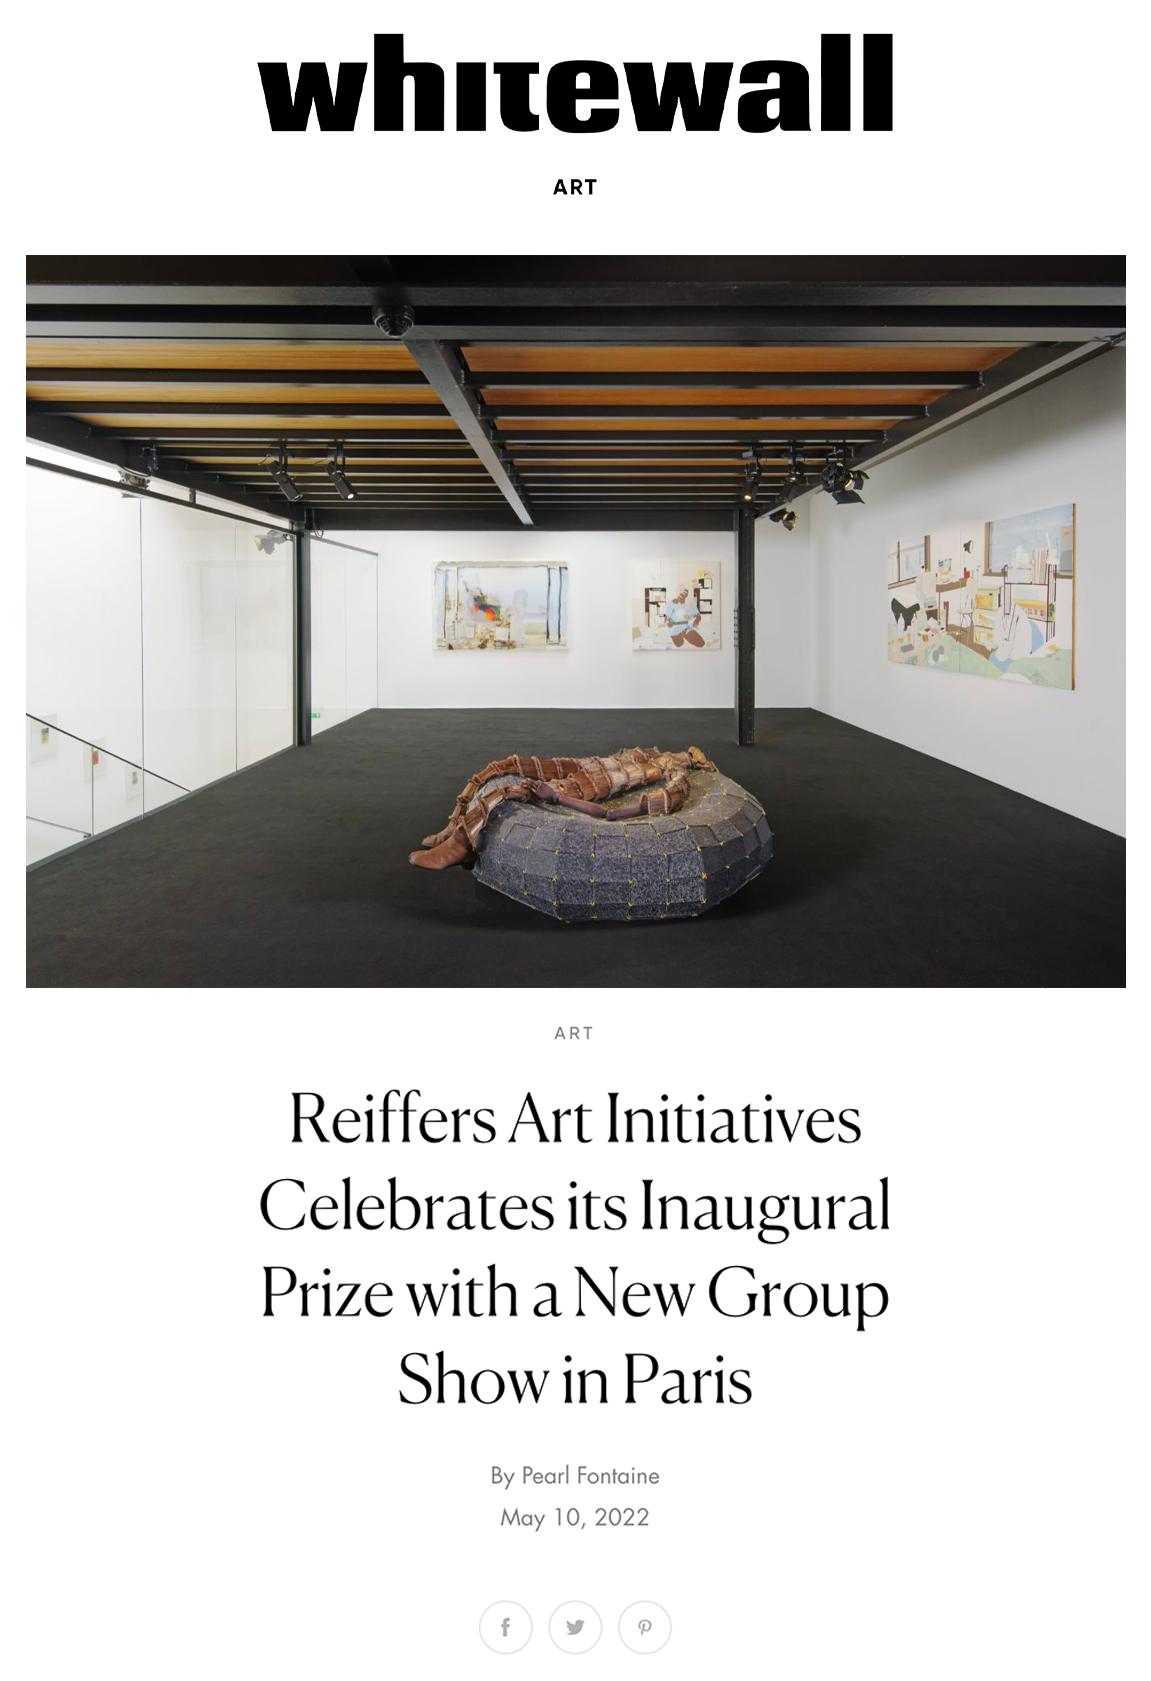 Reiffers Art Initiatives Celebrates its Inaugural Prize with a New Group Show in Paris